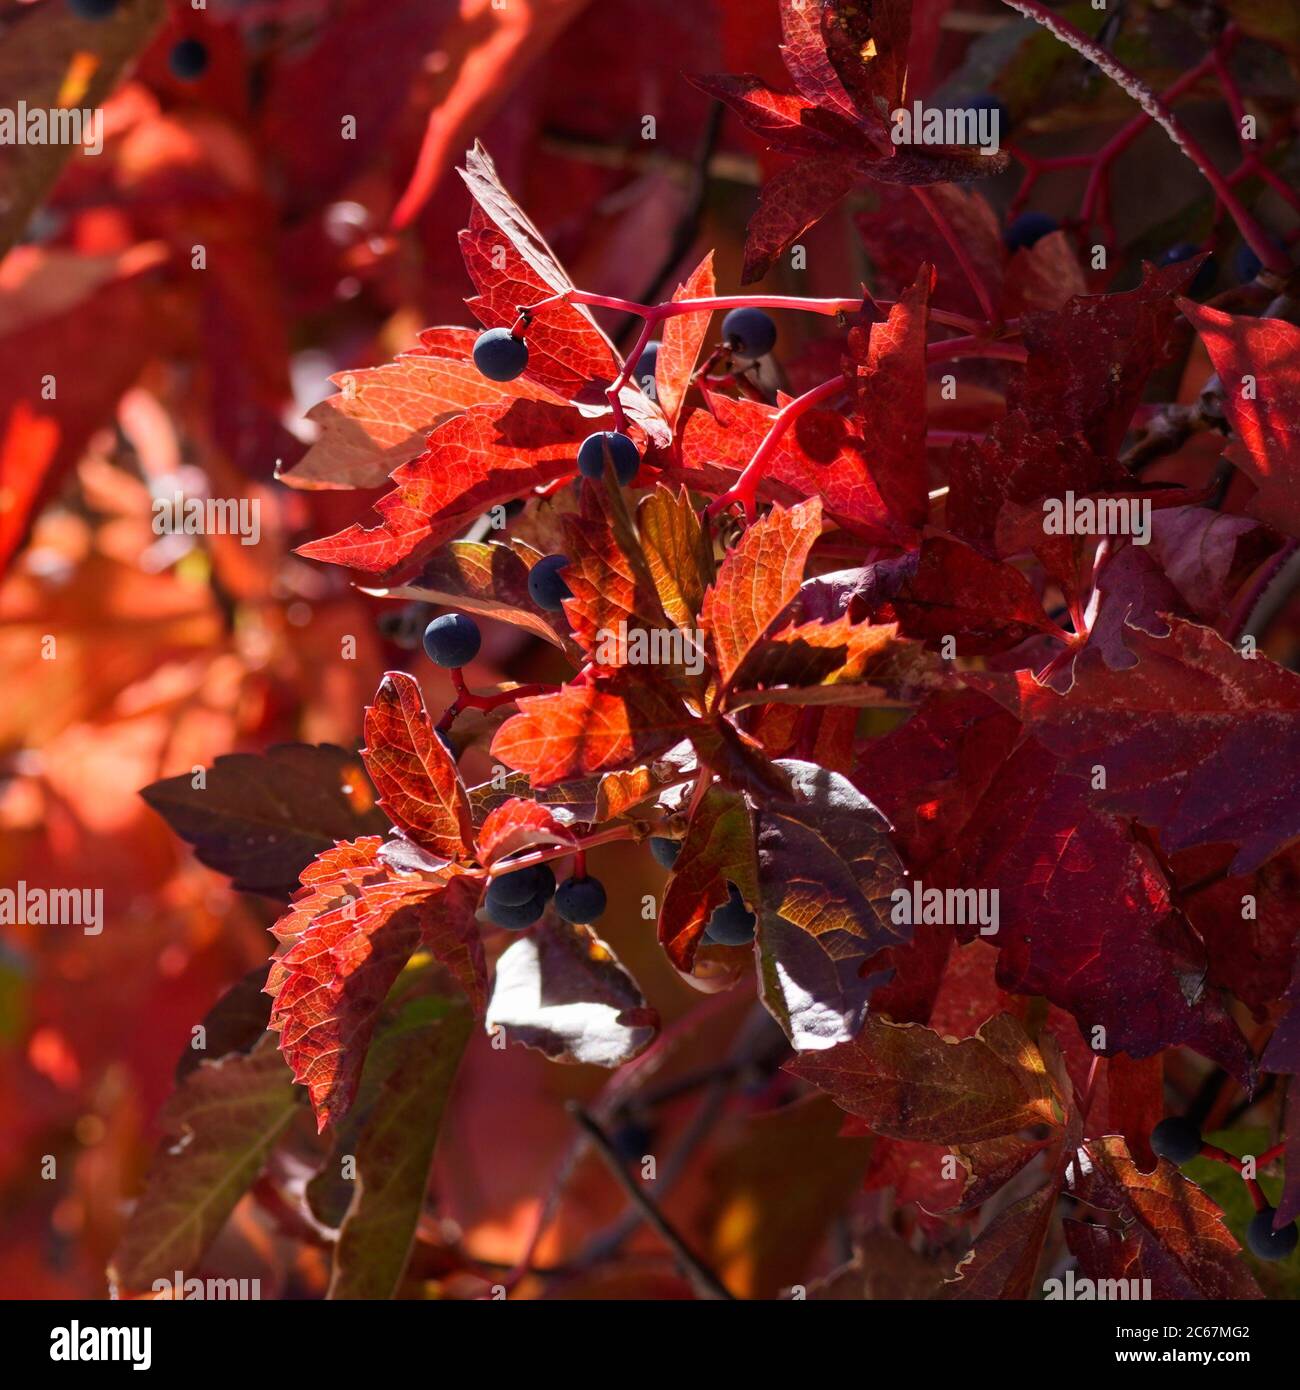 The colorful leaves and berries of a Virginia Creeper Vine in autumn. Stock Photo